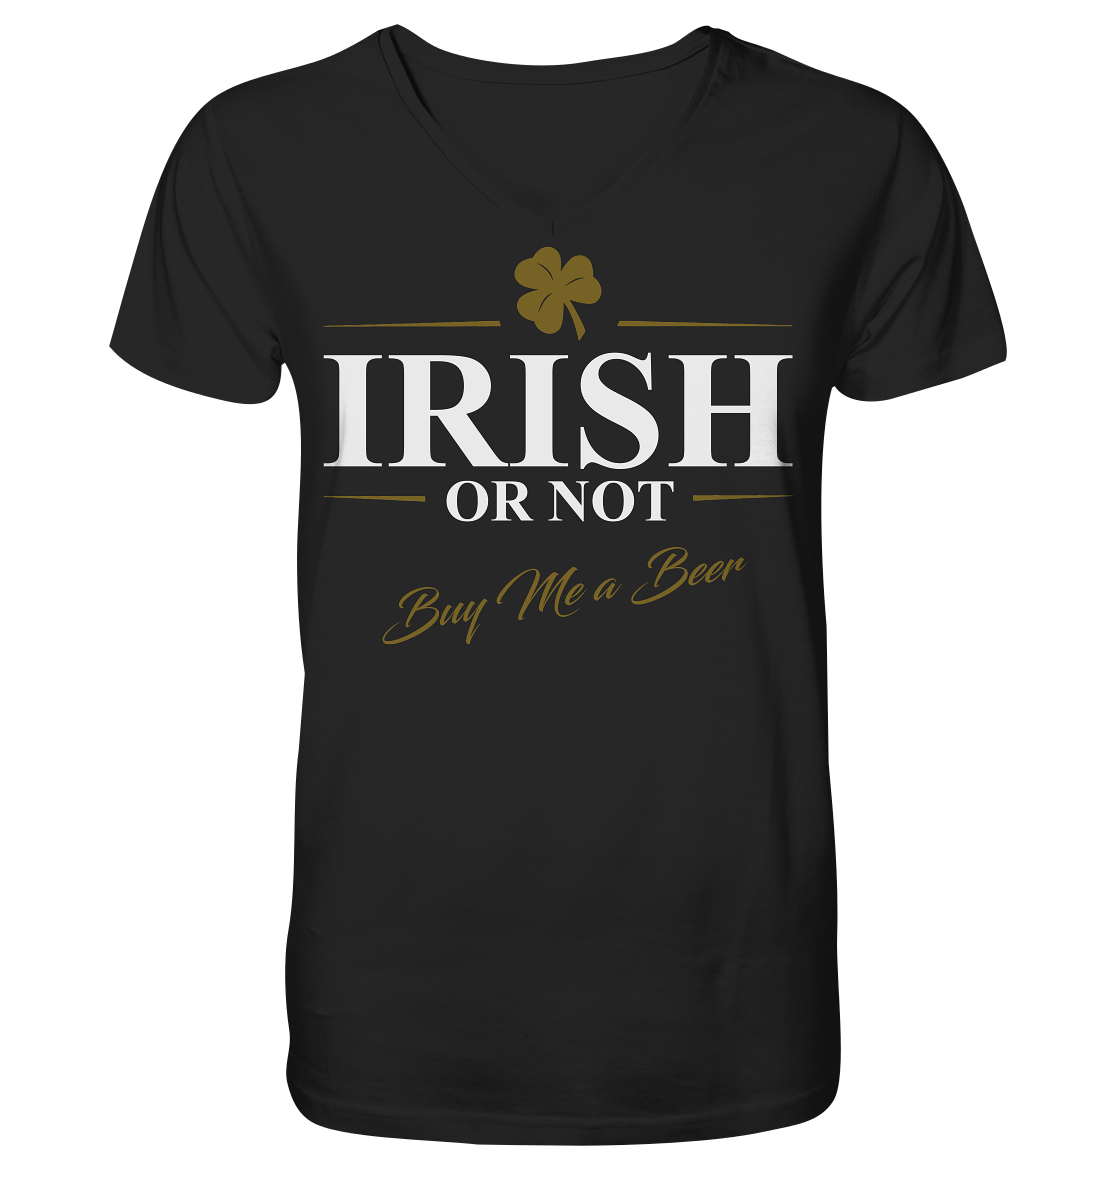 Irish Or Not "Buy Me A Beer" - V-Neck Shirt